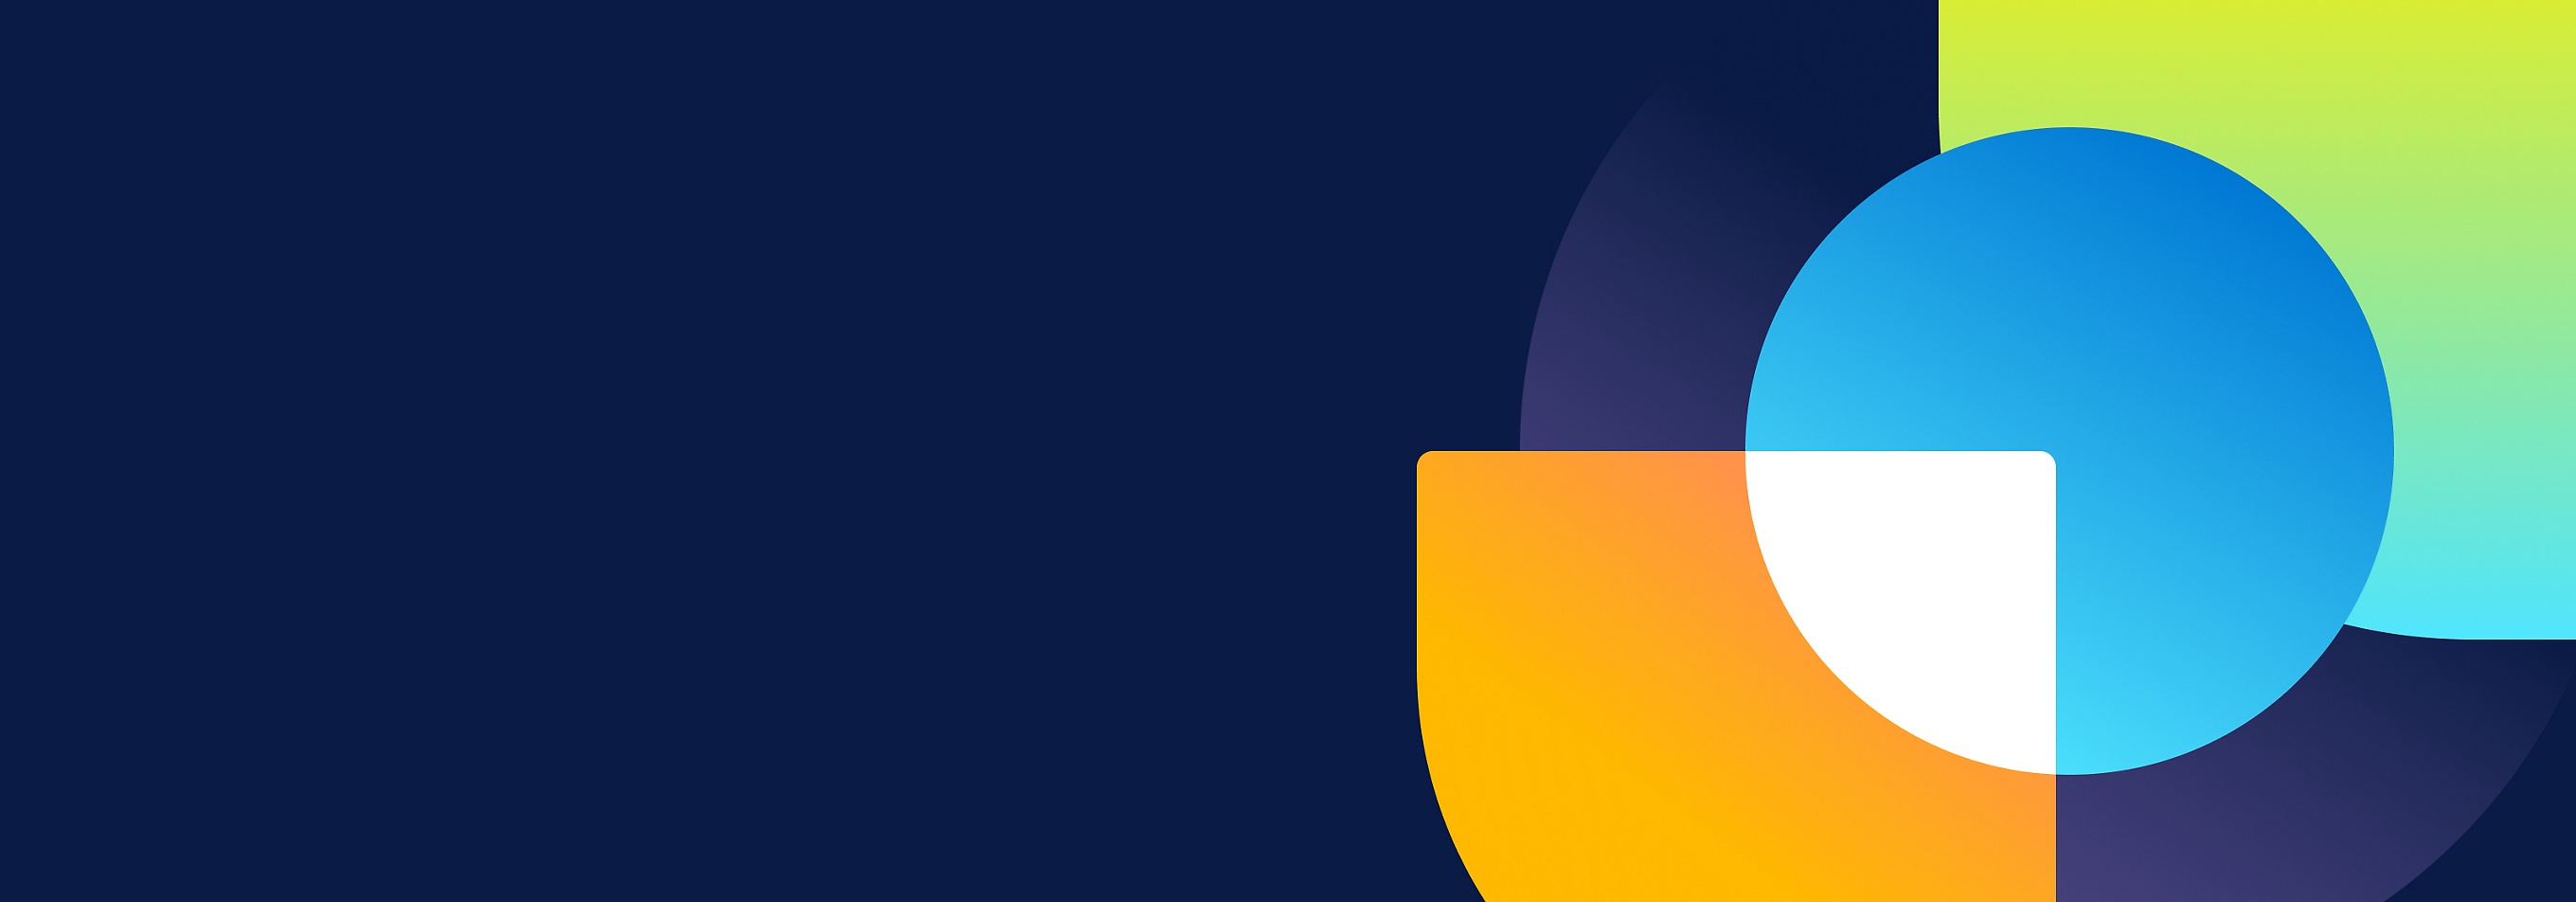 A blue, yellow, and orange circle on a dark blue background.